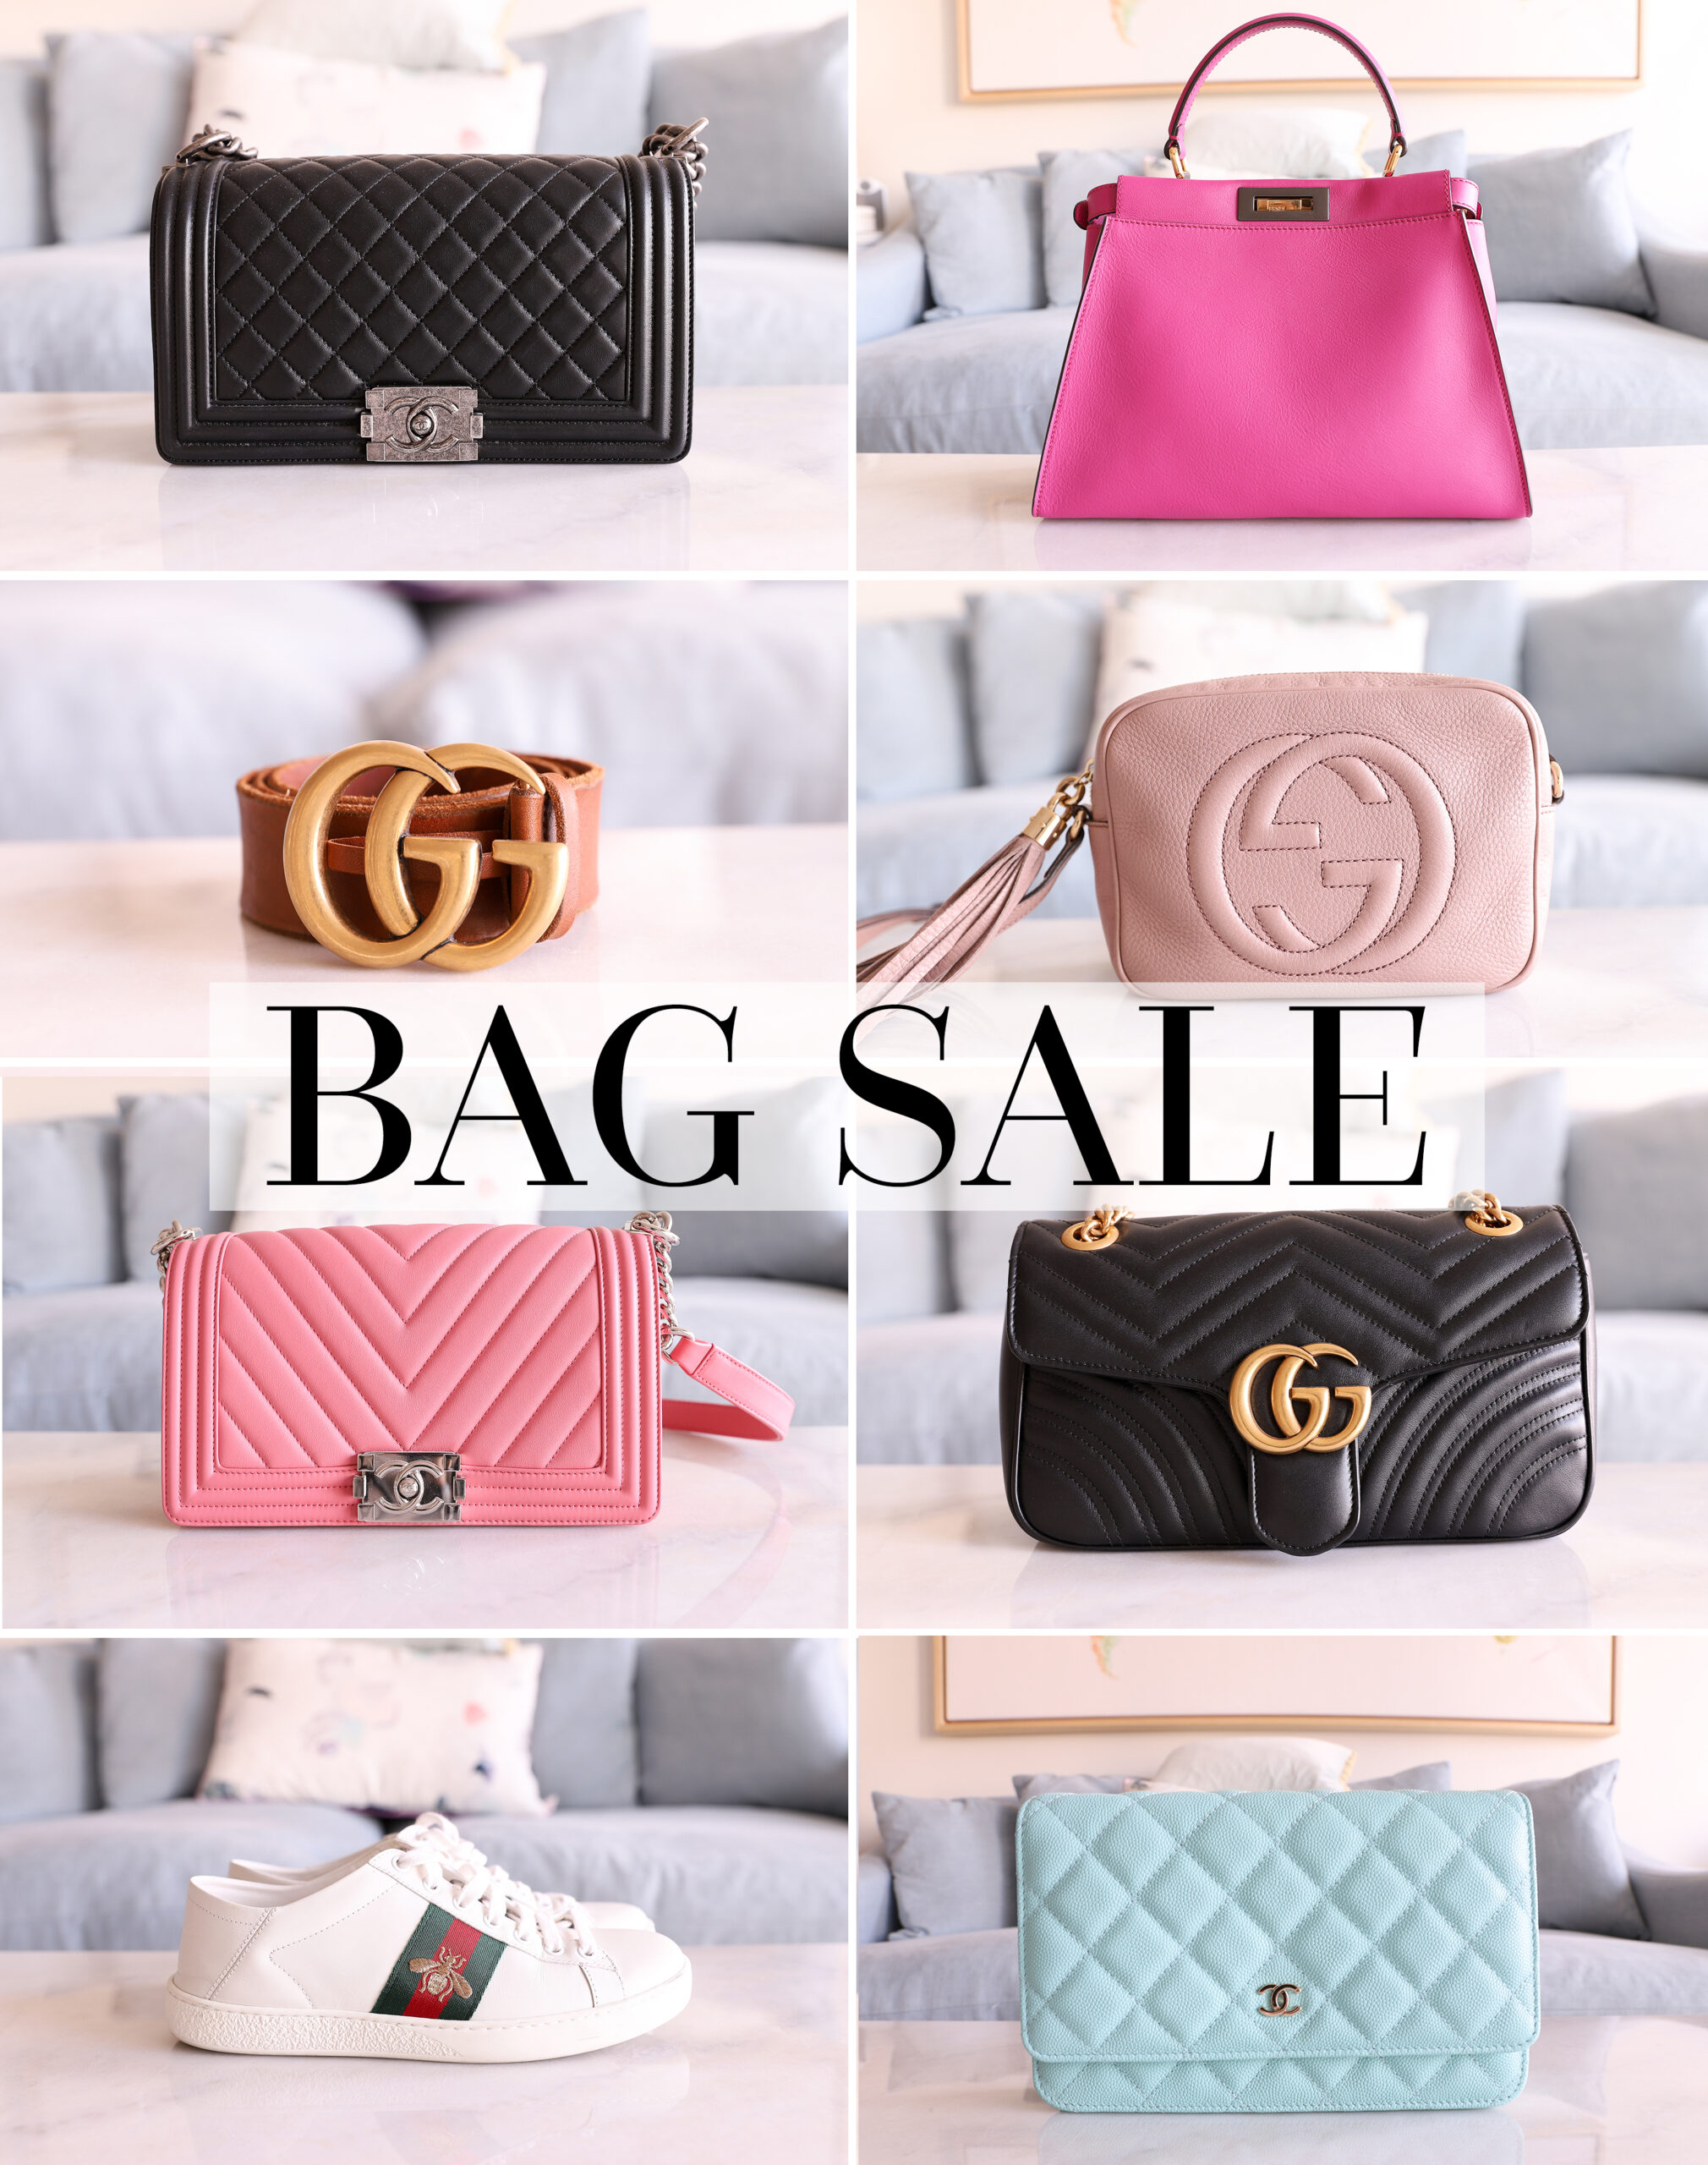 Handbags News, Pictures, and Videos - E! Online